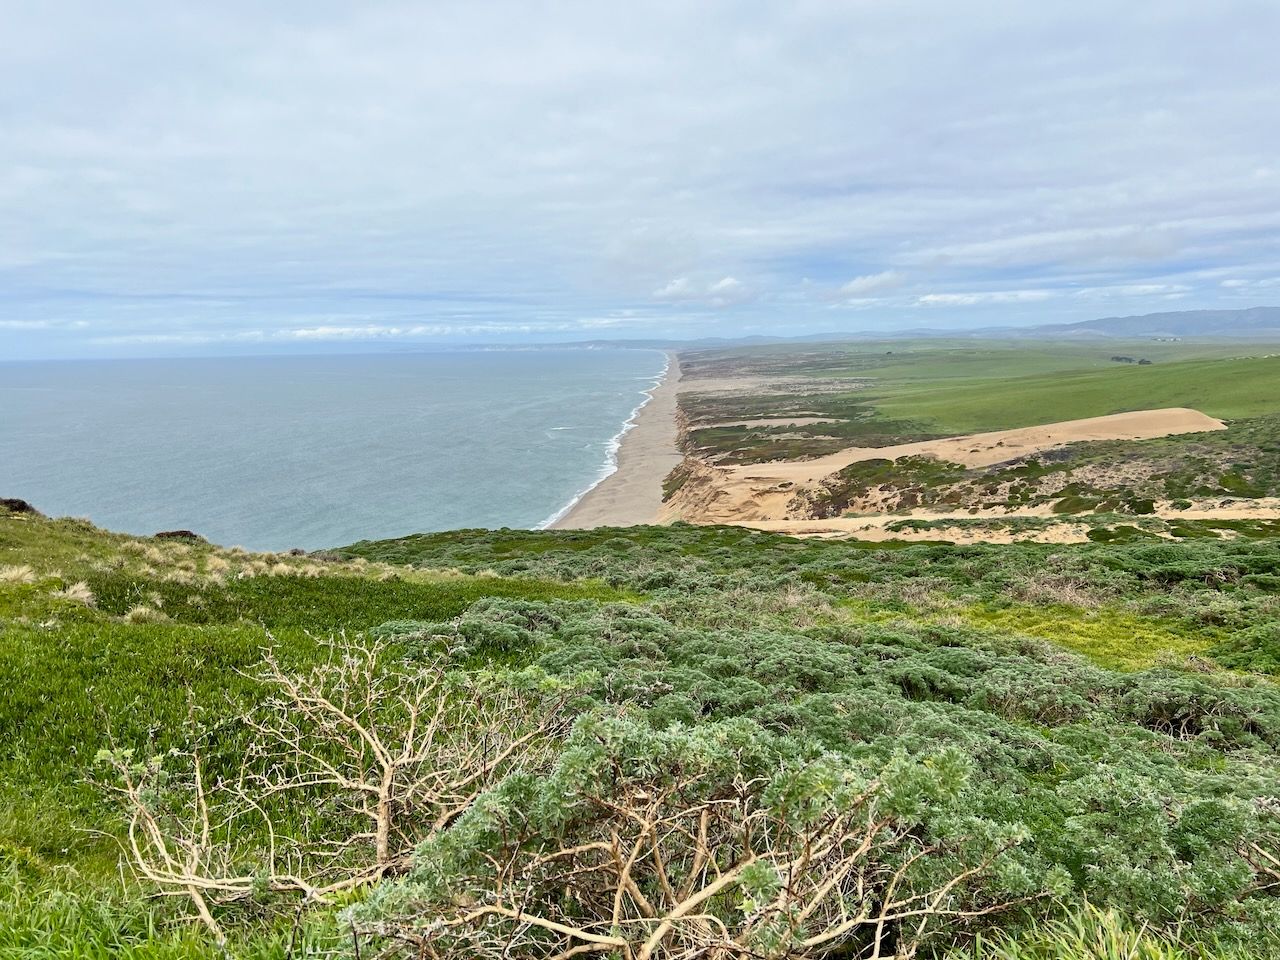 Tomales Bay and Point Reyes